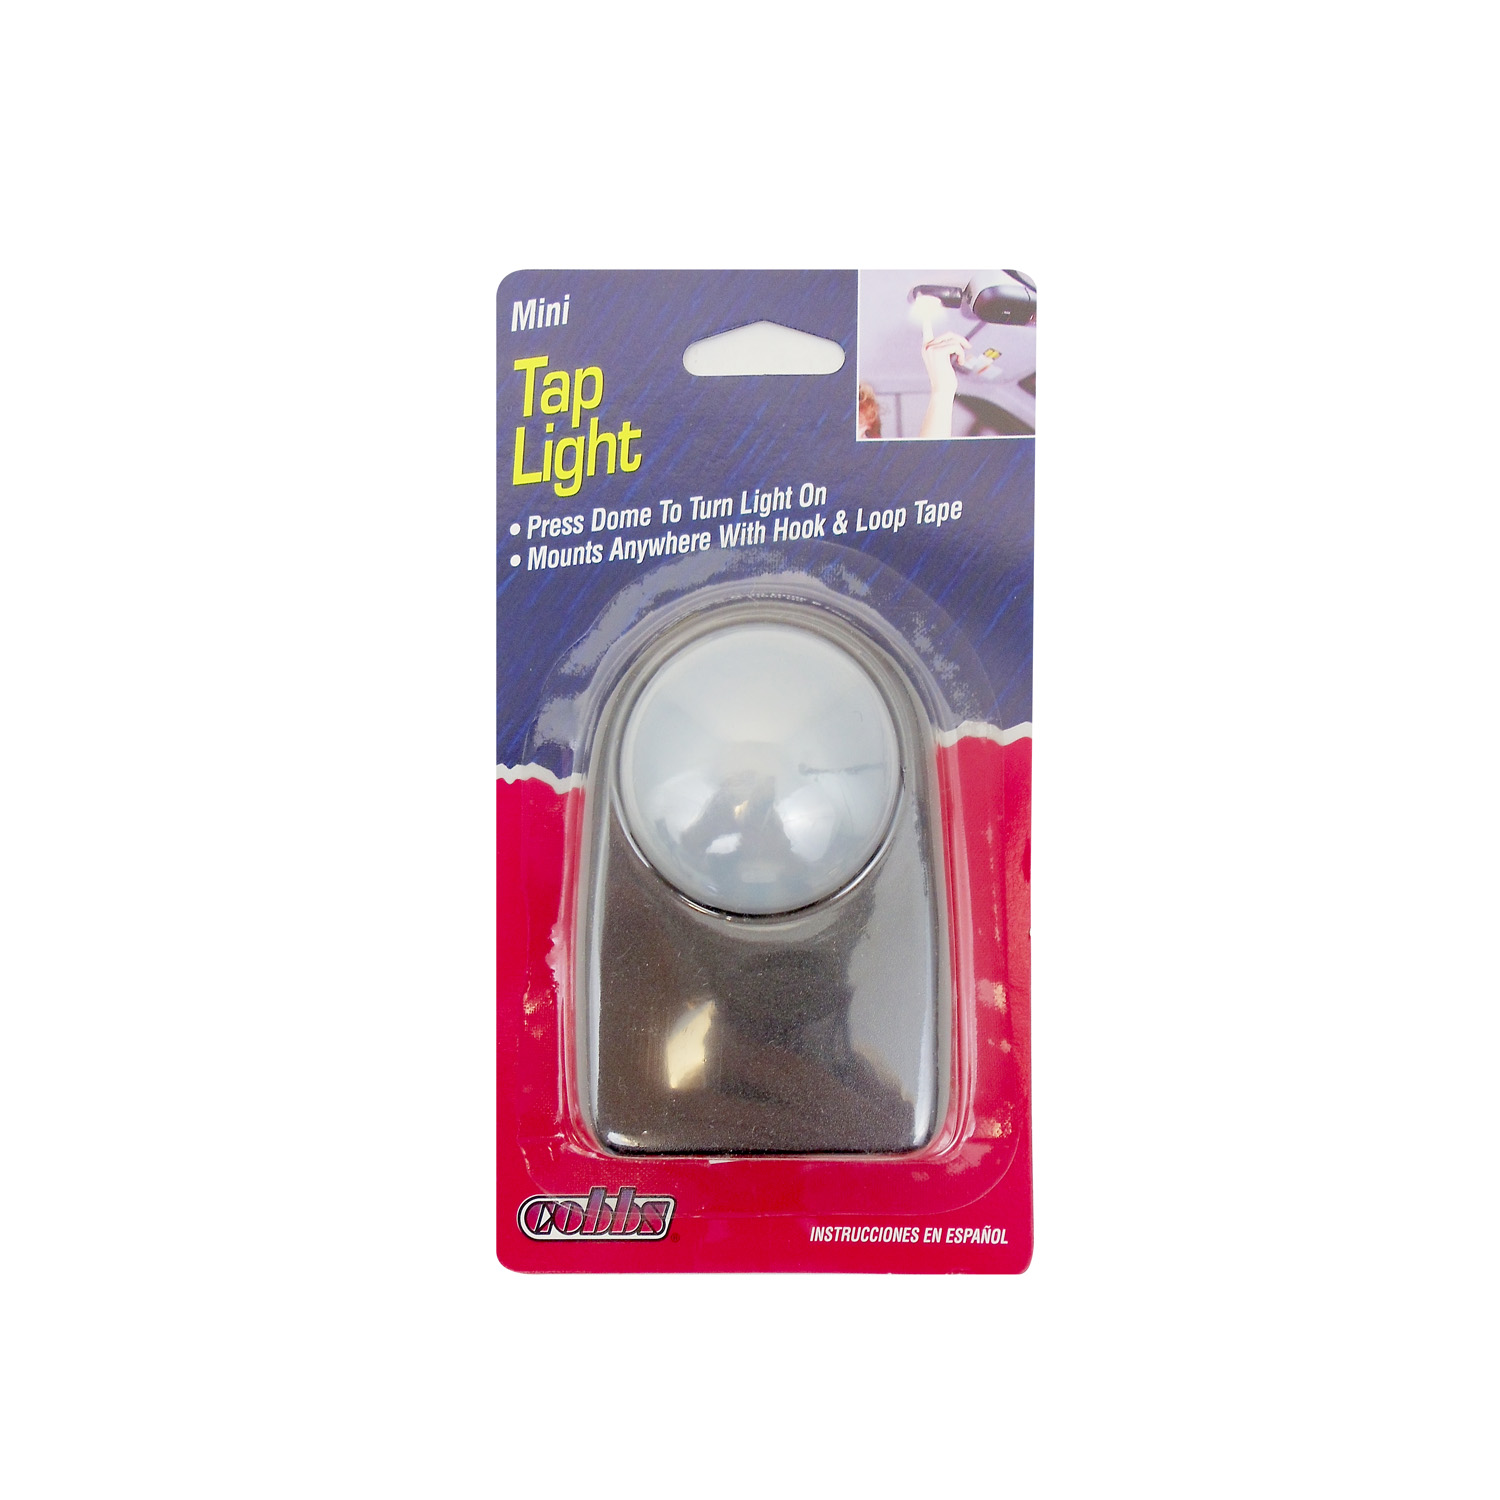 COBBS - MINI TAP LIGHT - PRESS DOME TO TURN ON & OFF, MOUNTS WITH HOOK & LOOP TAPE